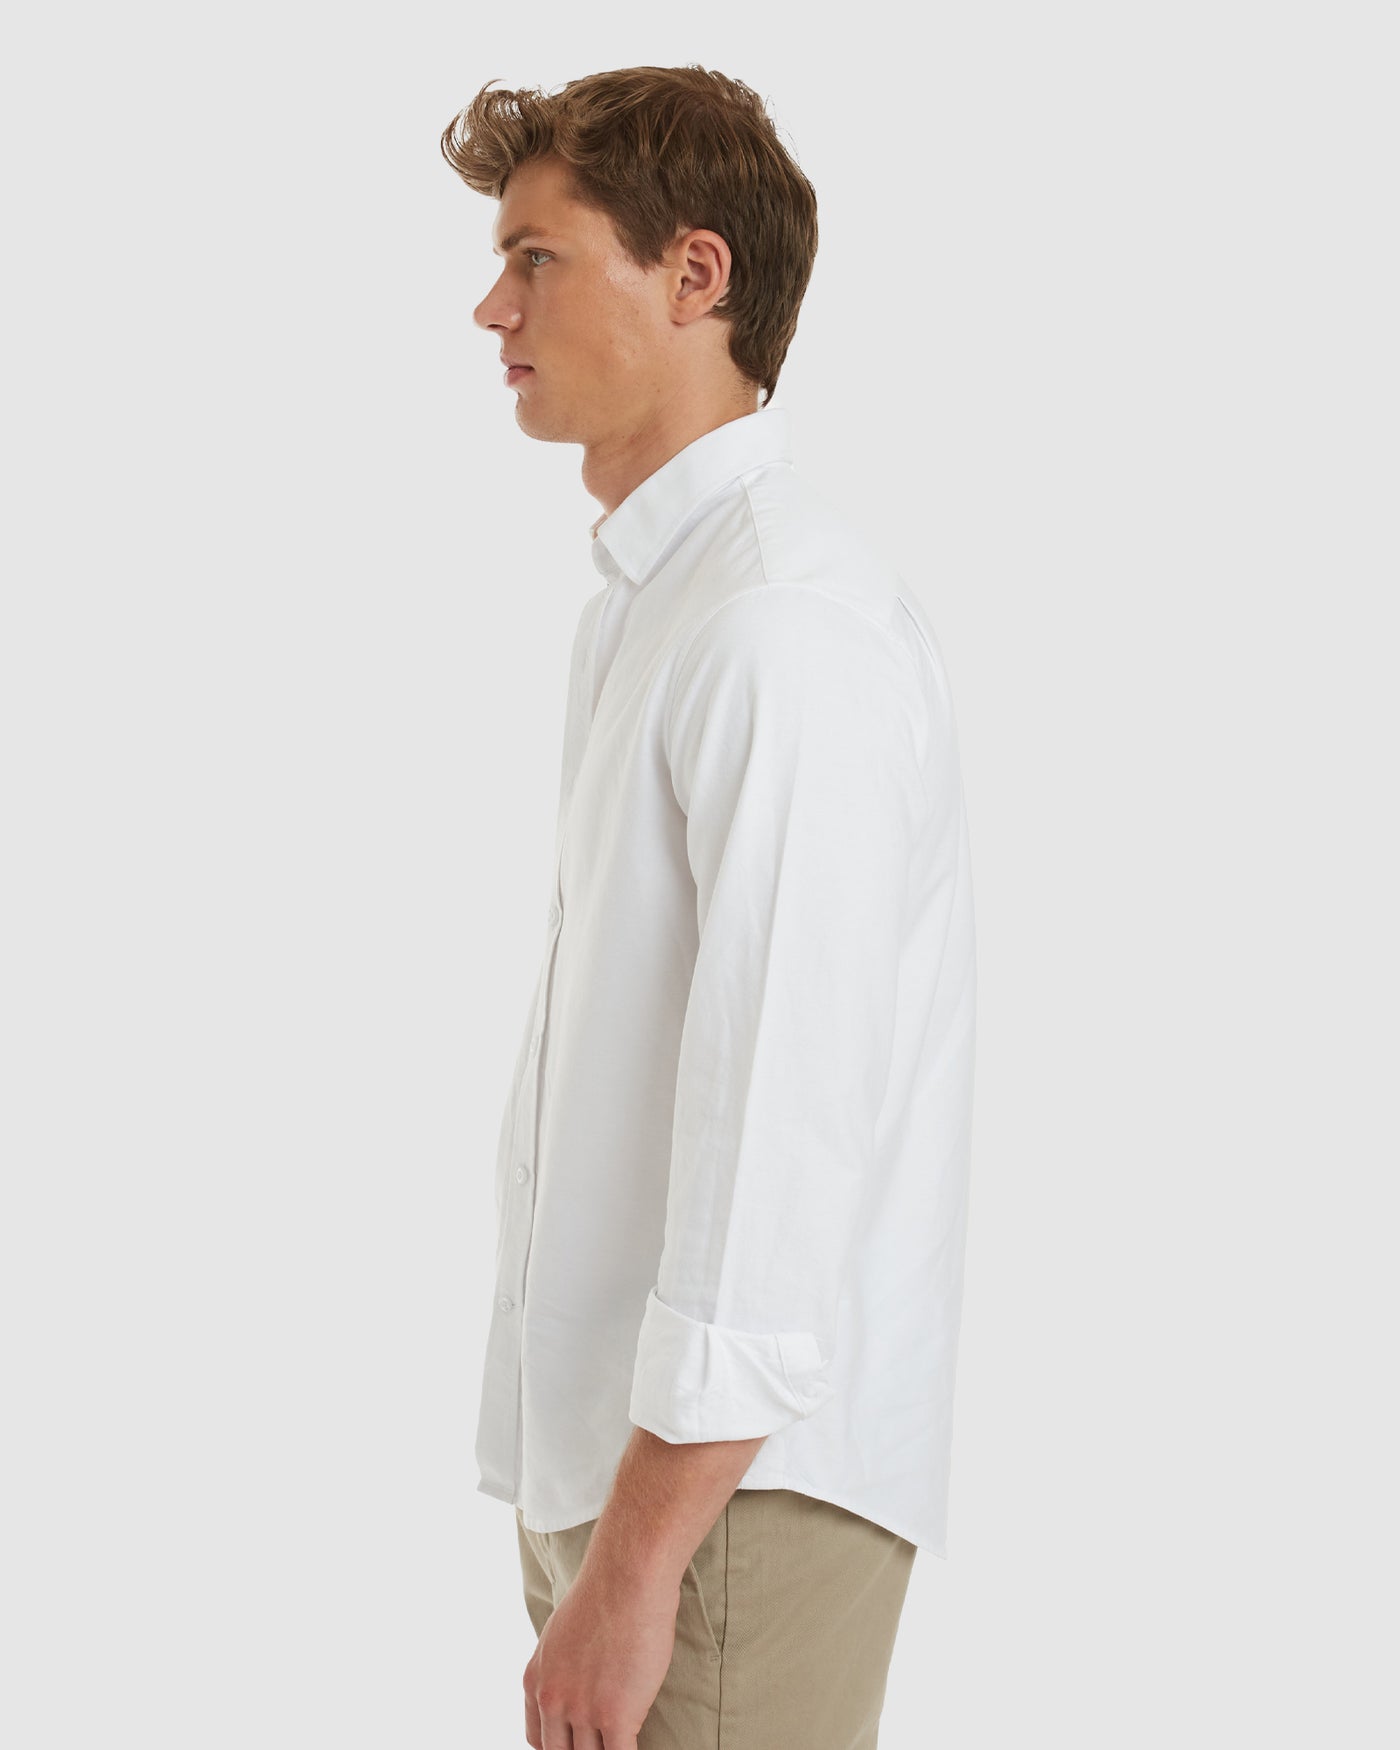 Oxford White Cotton Shirt  - Casual Fit